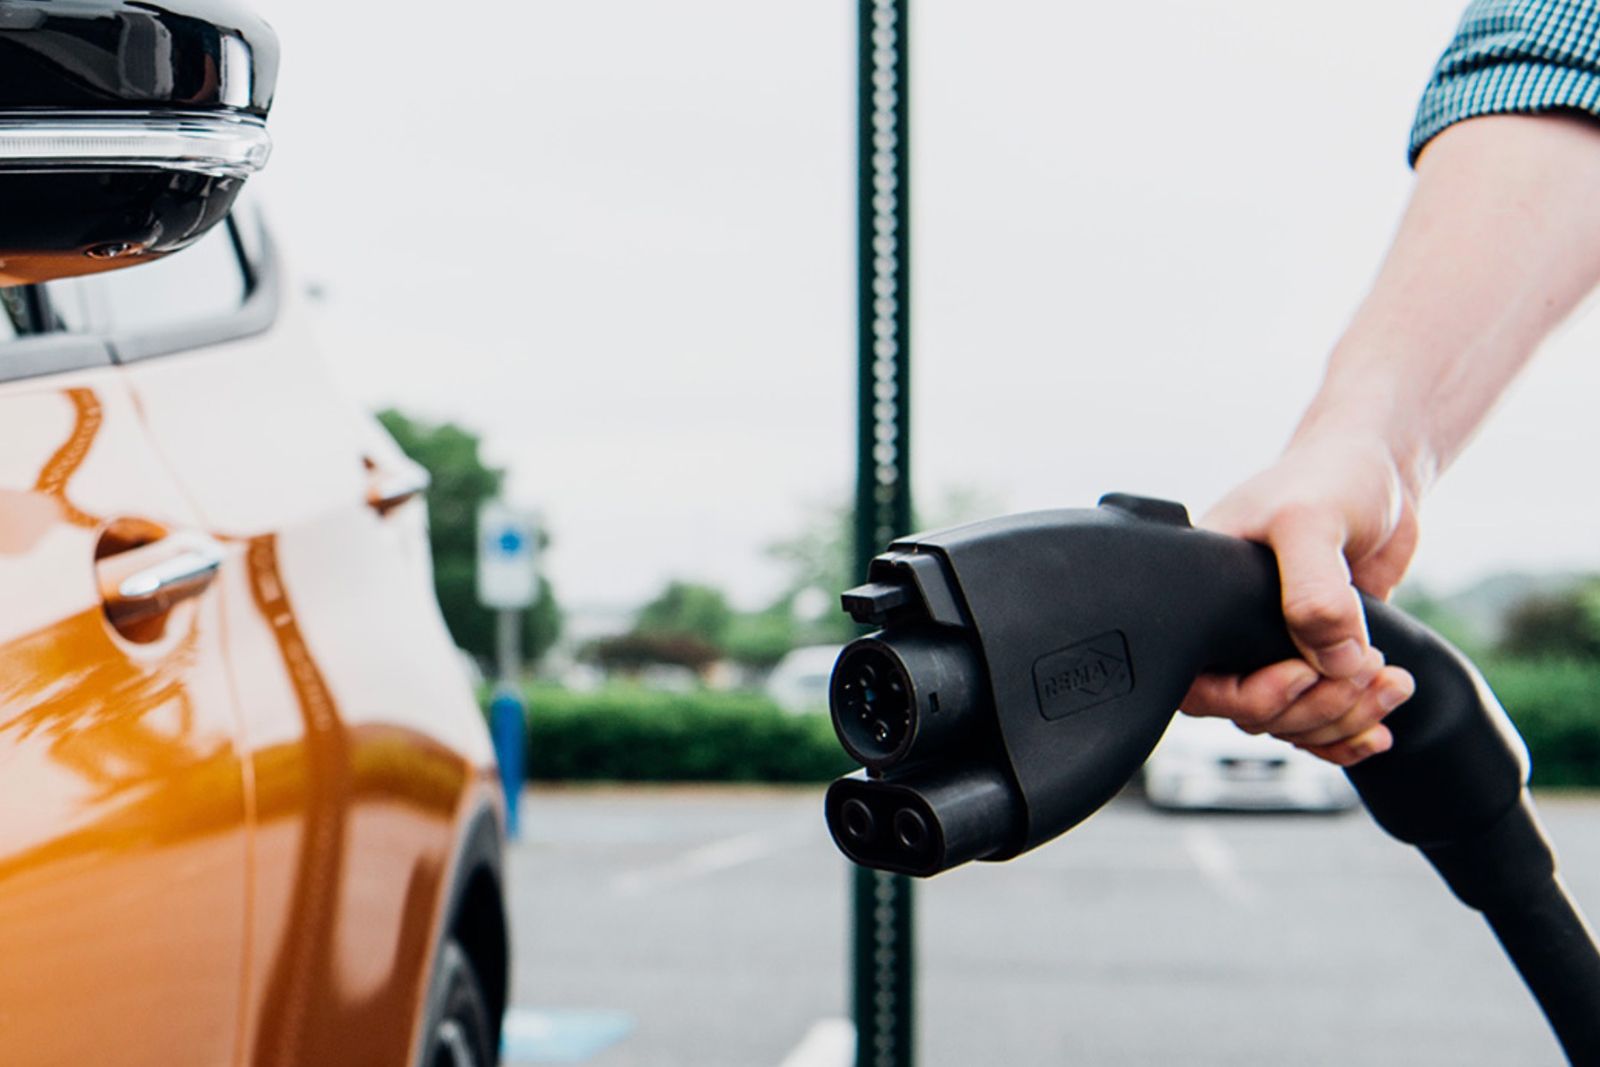 VW will install fast chargers for EVs at 100 US Walmart stores by 2019 image 1